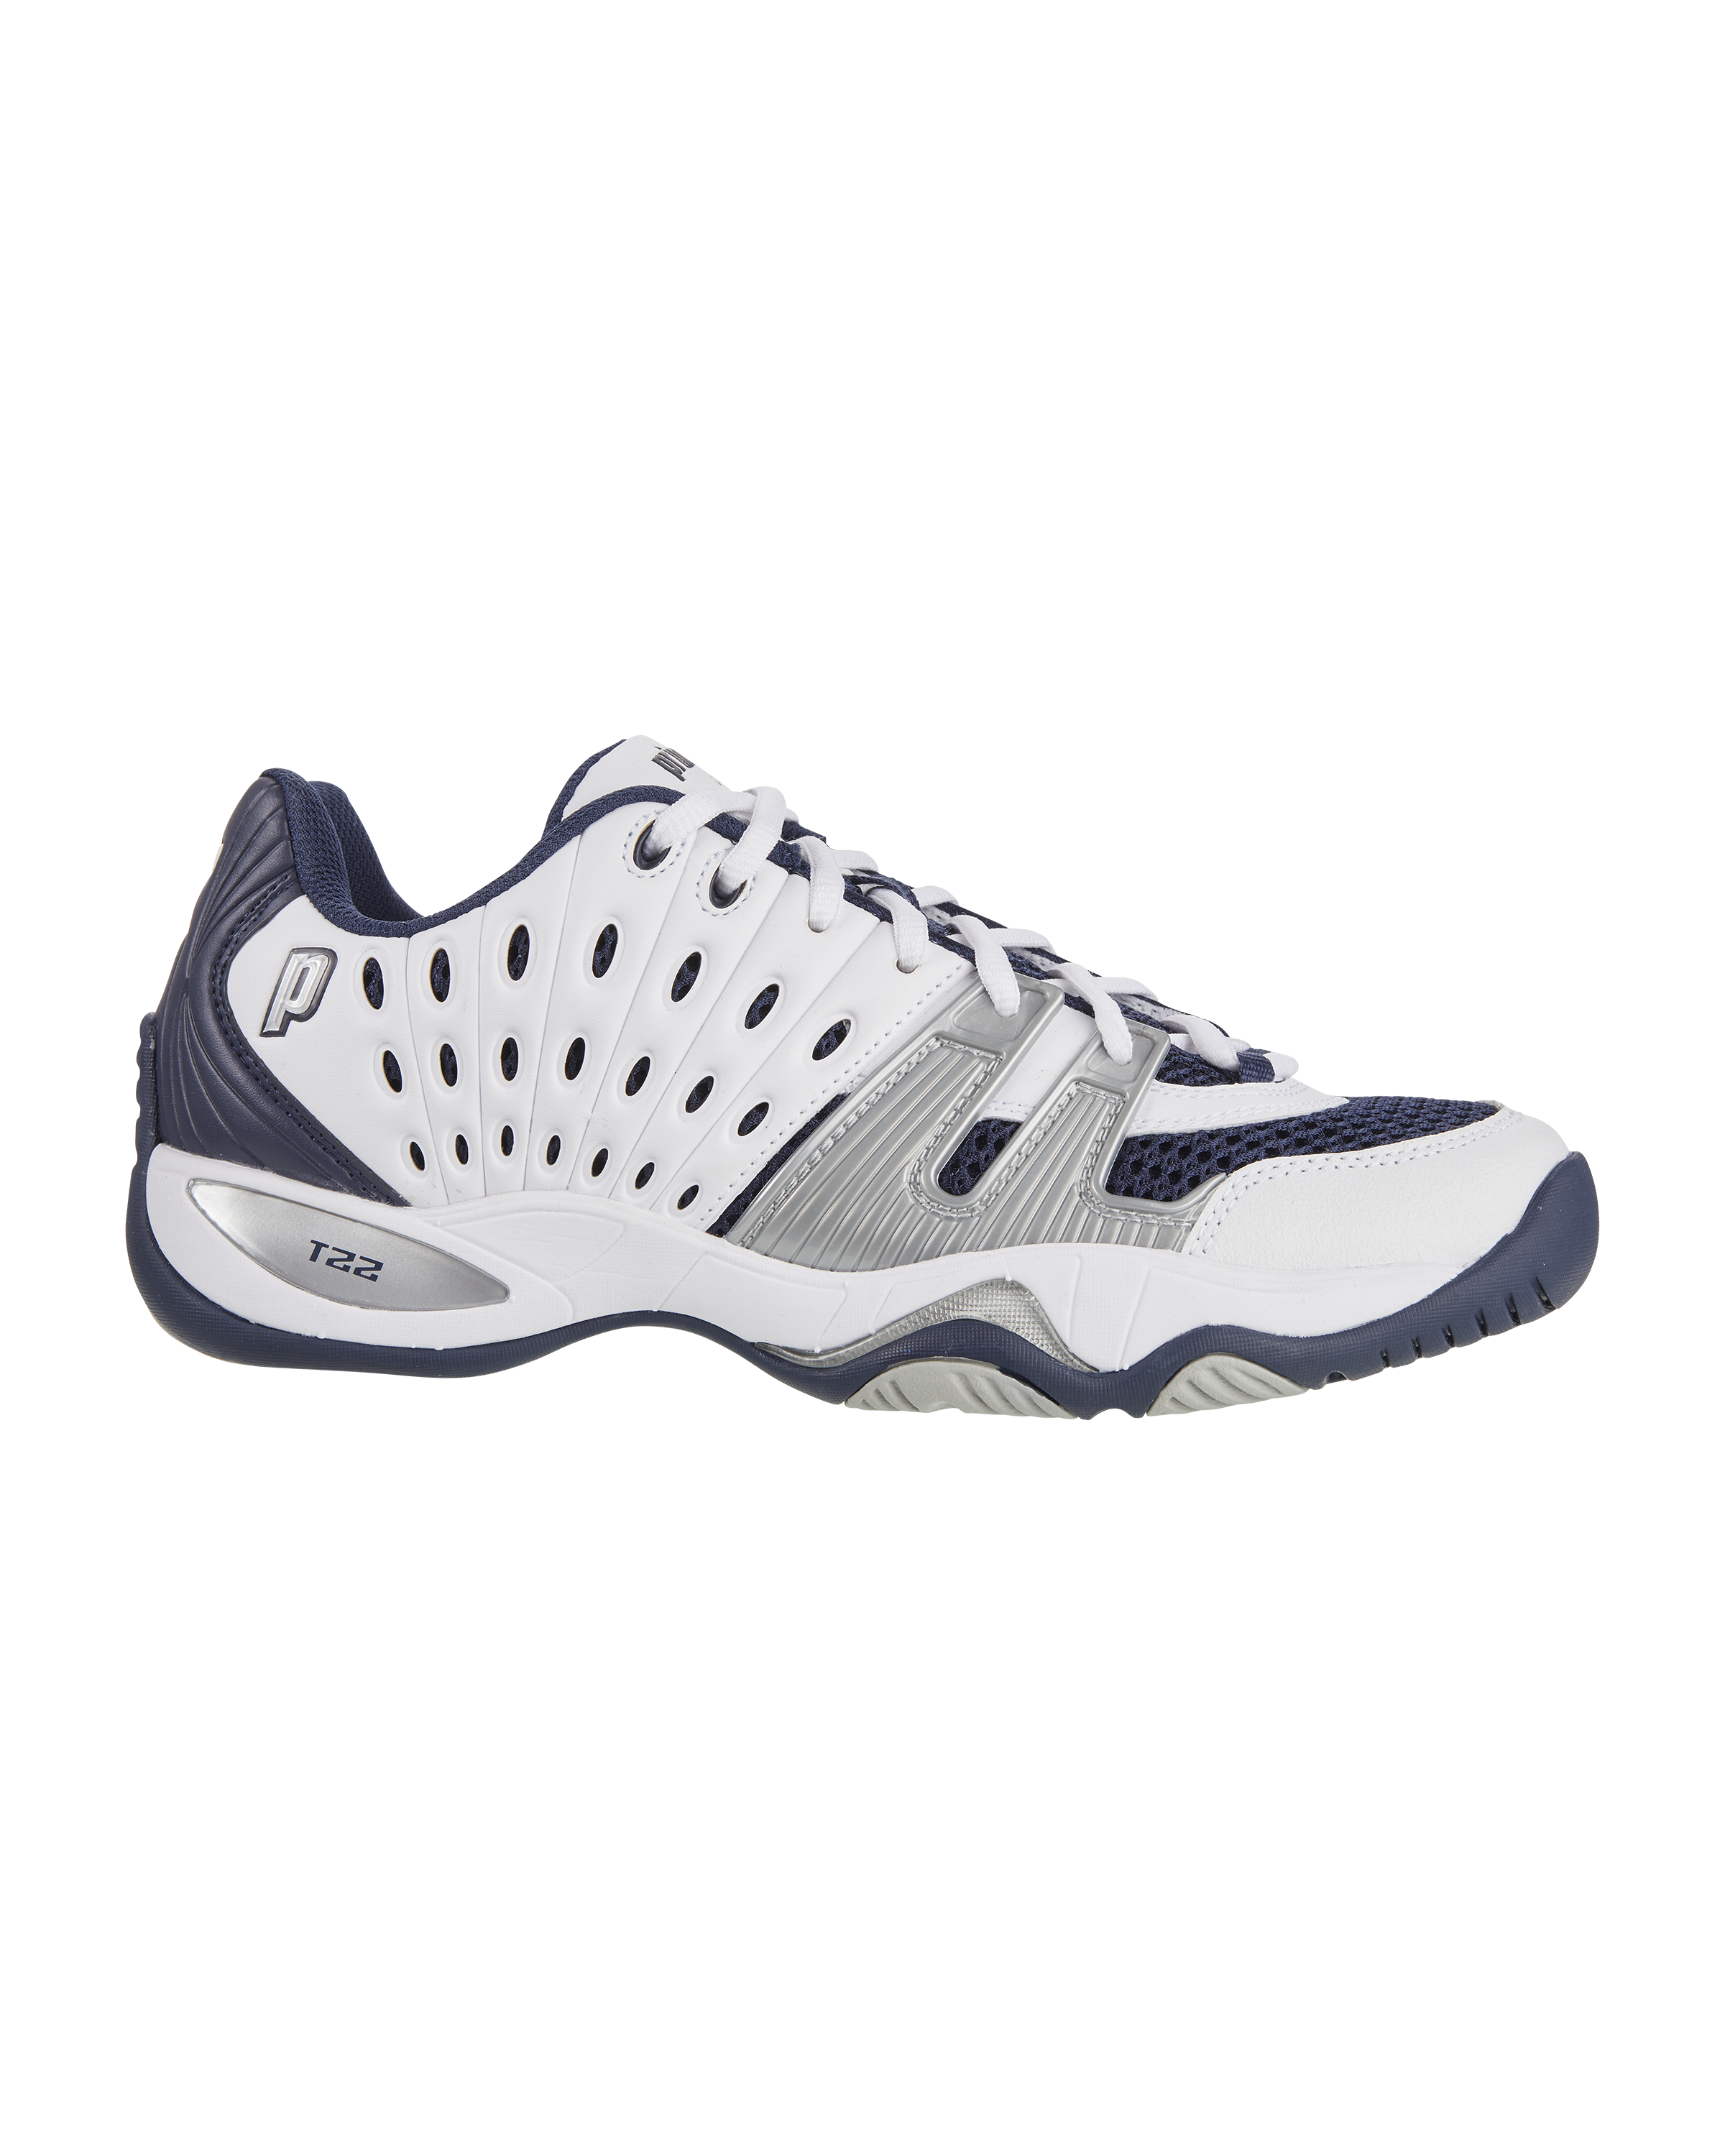 8P984853_T-22M_WHITE-NAVY-SILVER_LATERAL.png